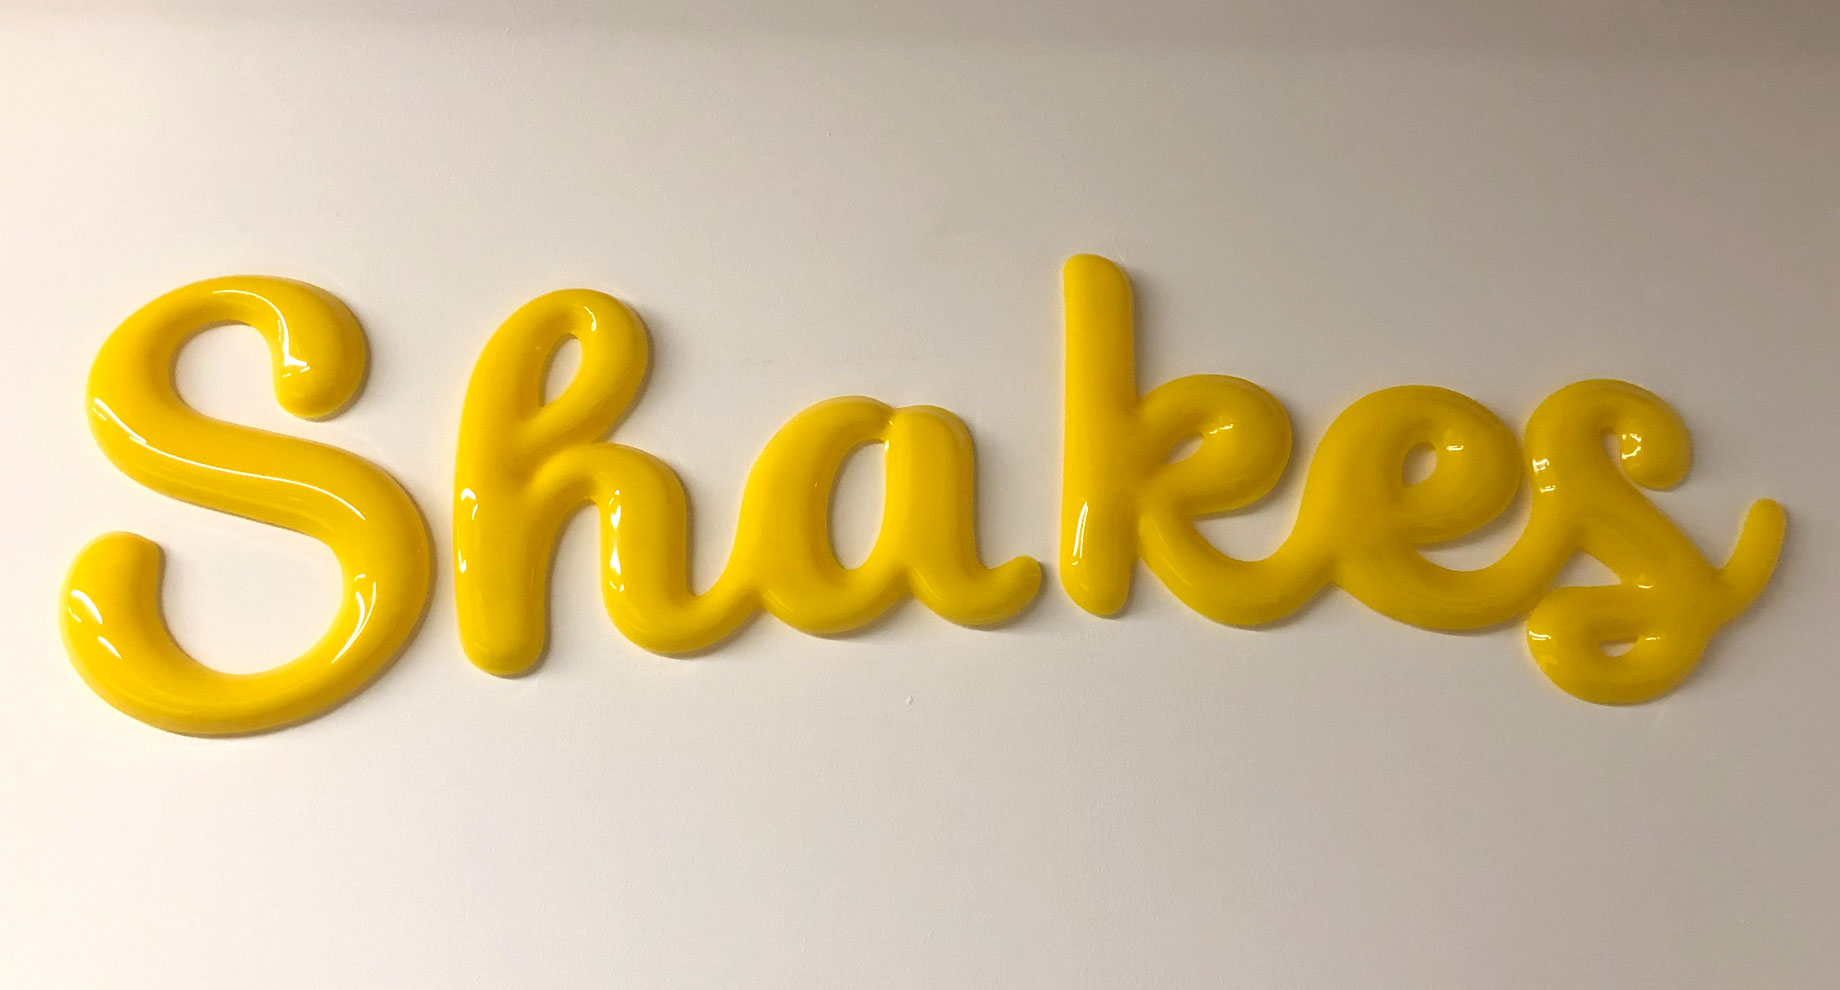 Vacuum Formed Acrylic Letters